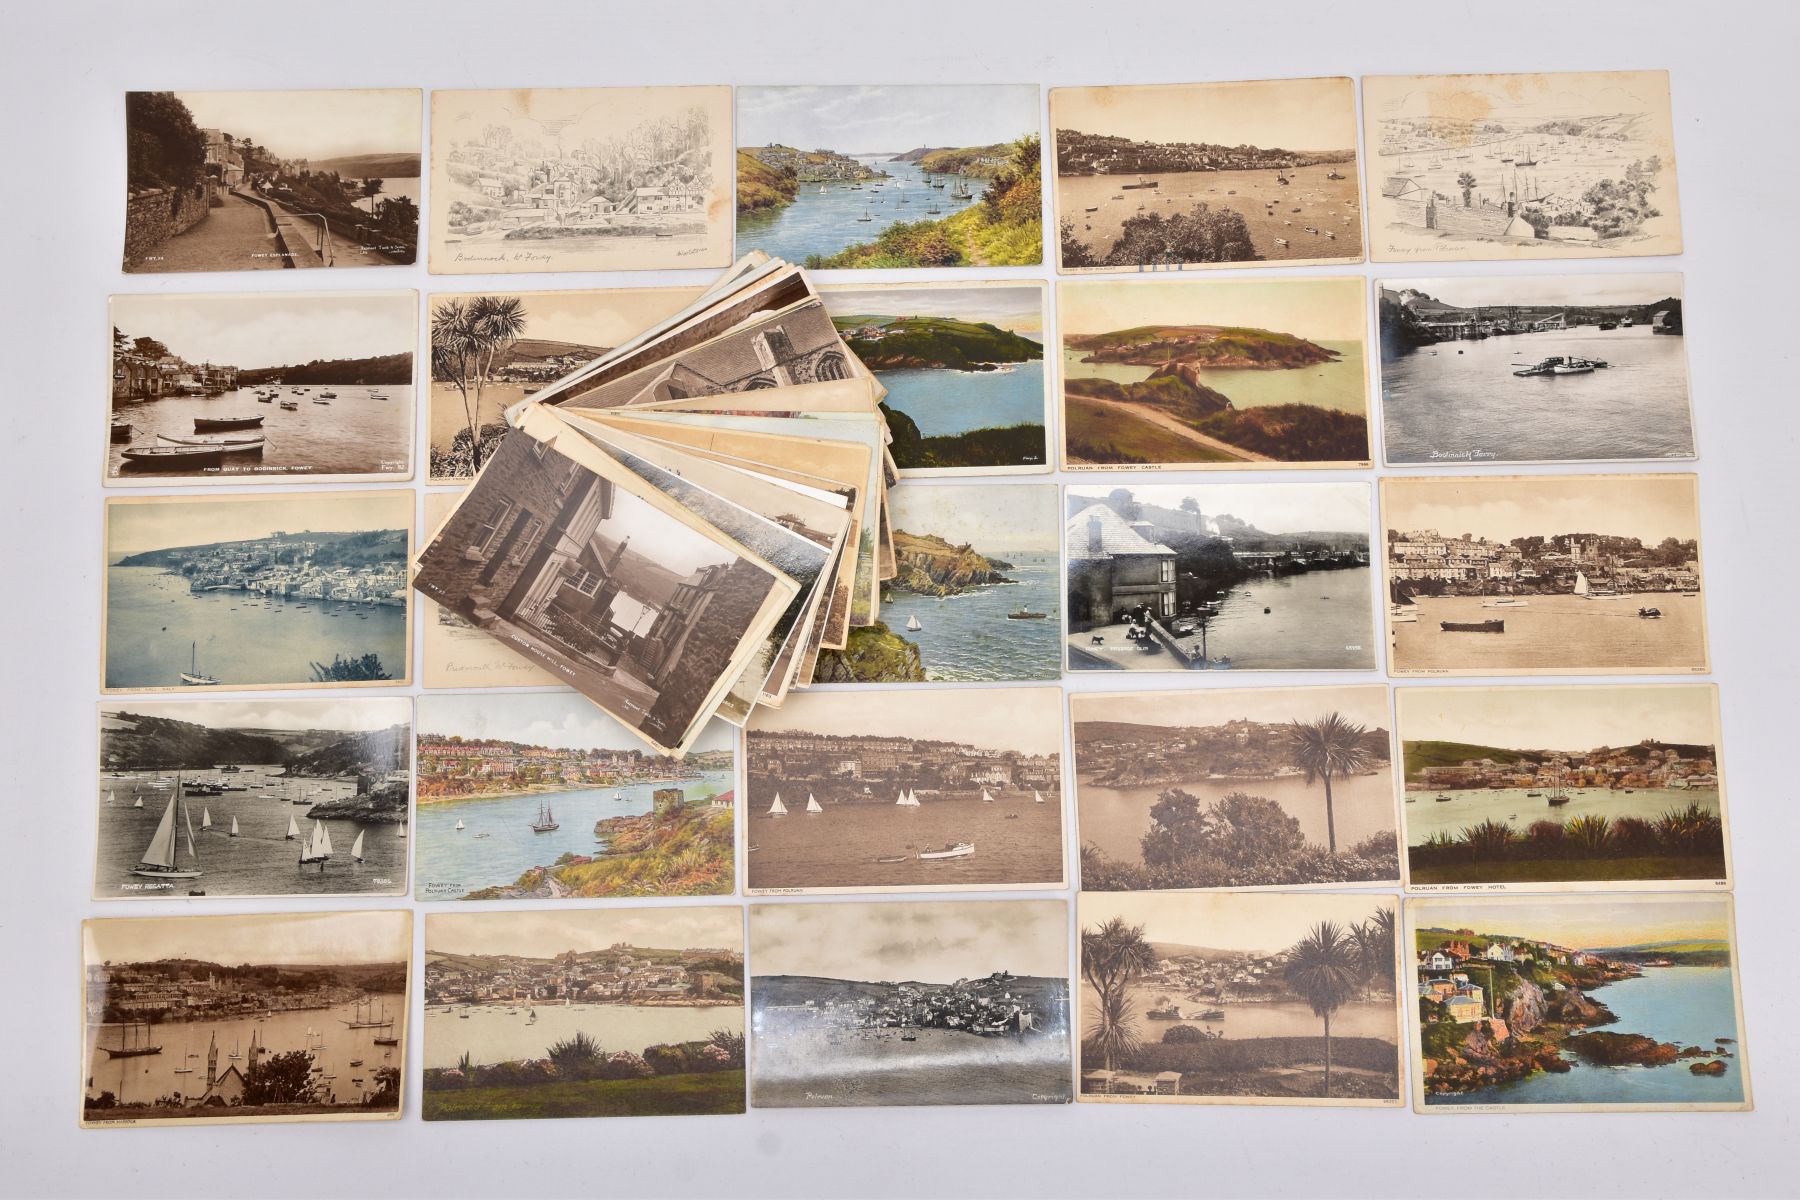 A FASCINATING LOT OF OVER SEVENTY FIVE POSTCARDS ALL FROM CORNWALL, which were sent by a US Naval